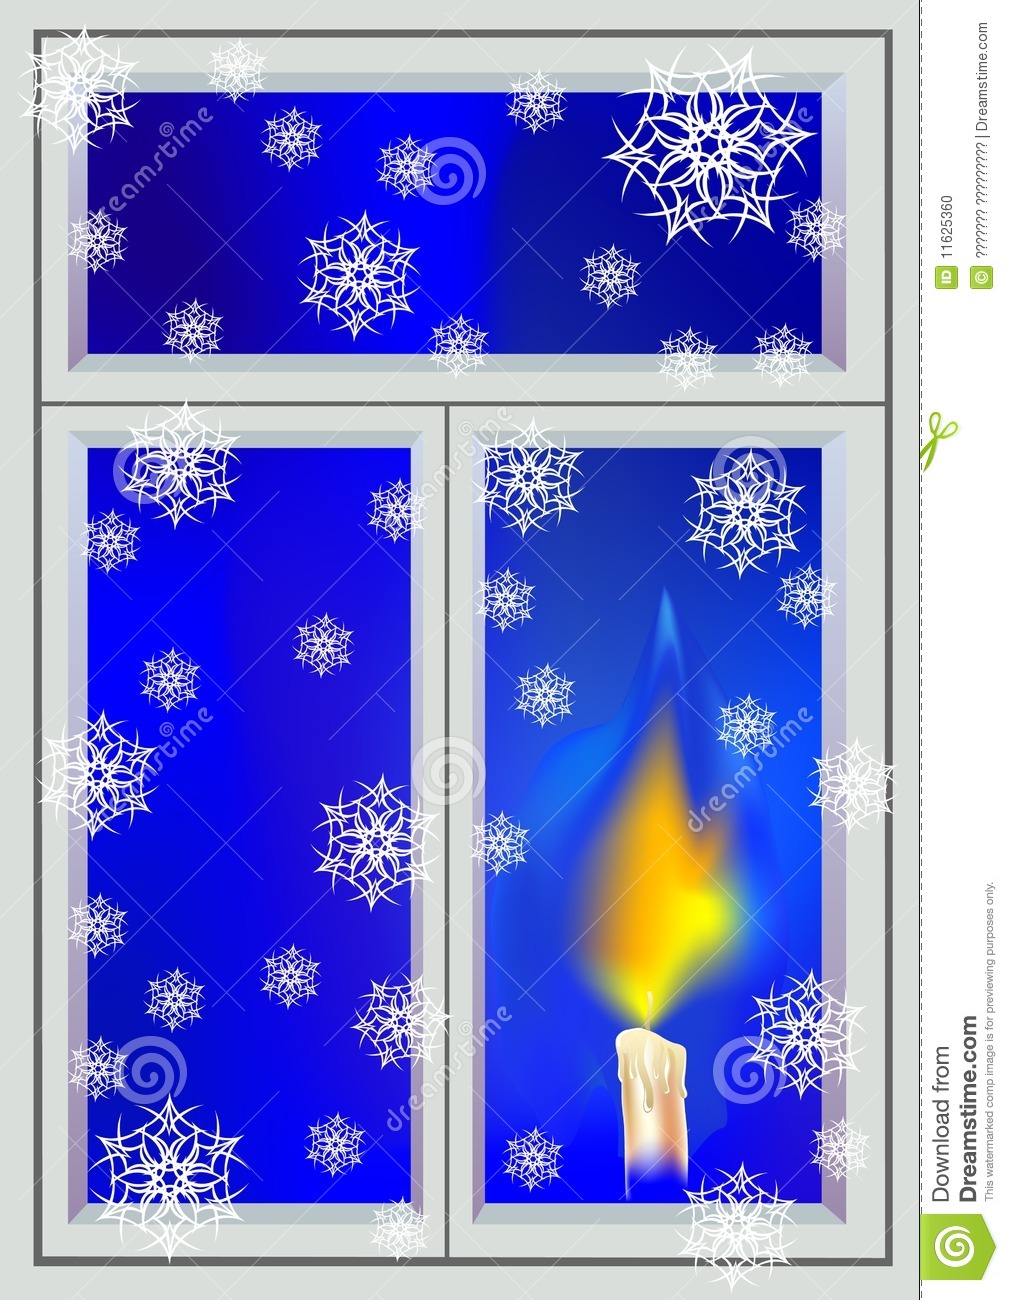 Drawing On The Theme Of Christmas  Burning Candle In The Window